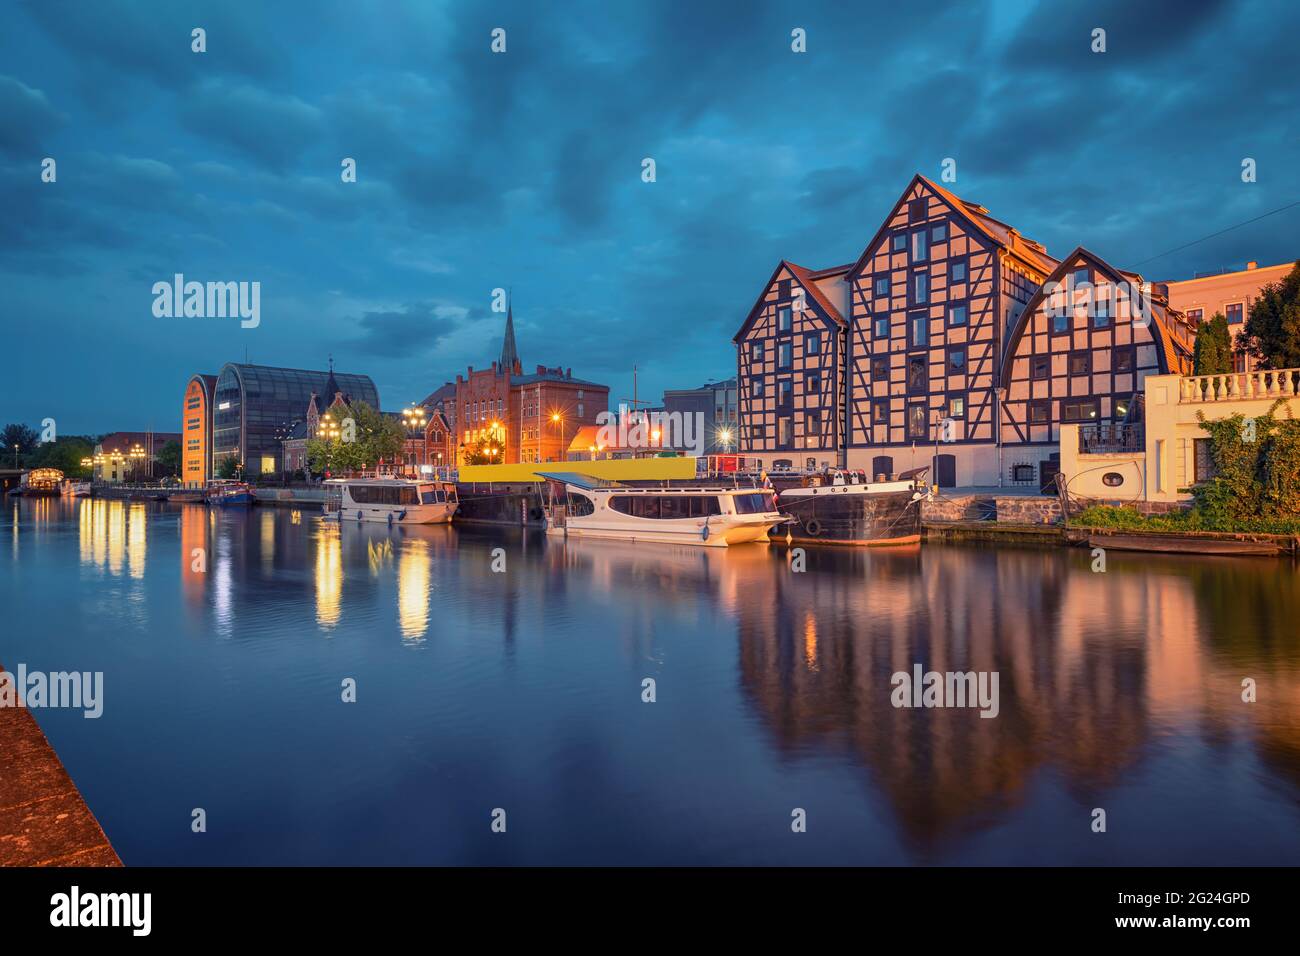 Bydgoszcz, Poland. View of old half-timbered buildings on embankment of Brda river at dusk Stock Photo